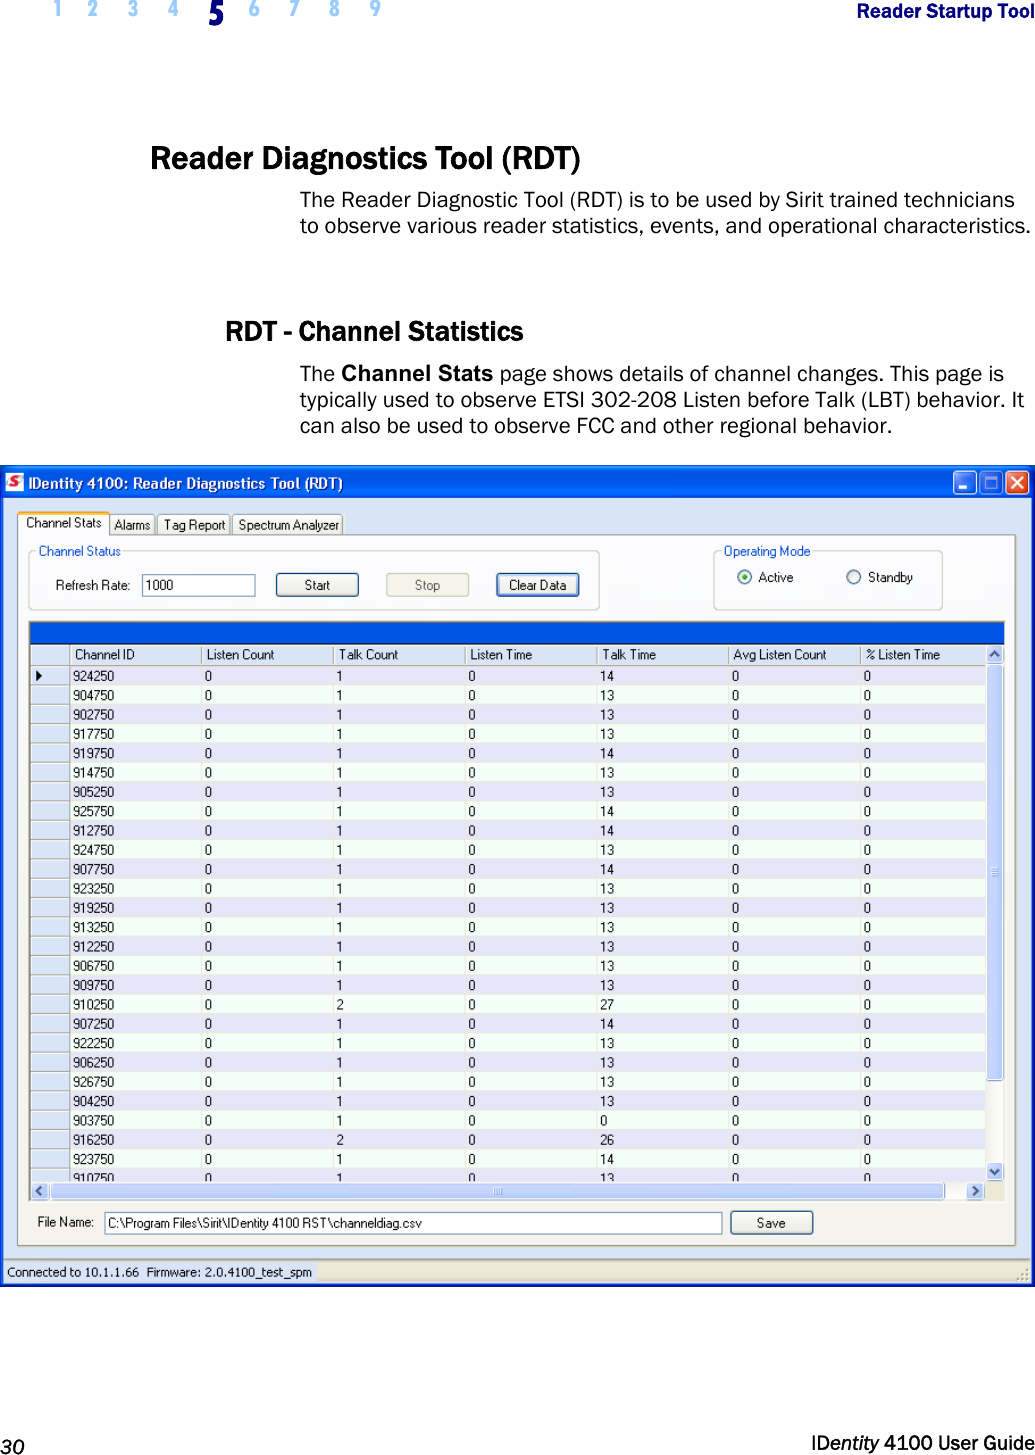  1 2  3  4 5 6 7 8 9       Reader Startup Tool   30  IDentity 4100 User Guide  Reader Diagnostics Tool (RDT) The Reader Diagnostic Tool (RDT) is to be used by Sirit trained technicians to observe various reader statistics, events, and operational characteristics.   RDT - Channel Statistics The Channel Stats page shows details of channel changes. This page is typically used to observe ETSI 302-208 Listen before Talk (LBT) behavior. It can also be used to observe FCC and other regional behavior.   